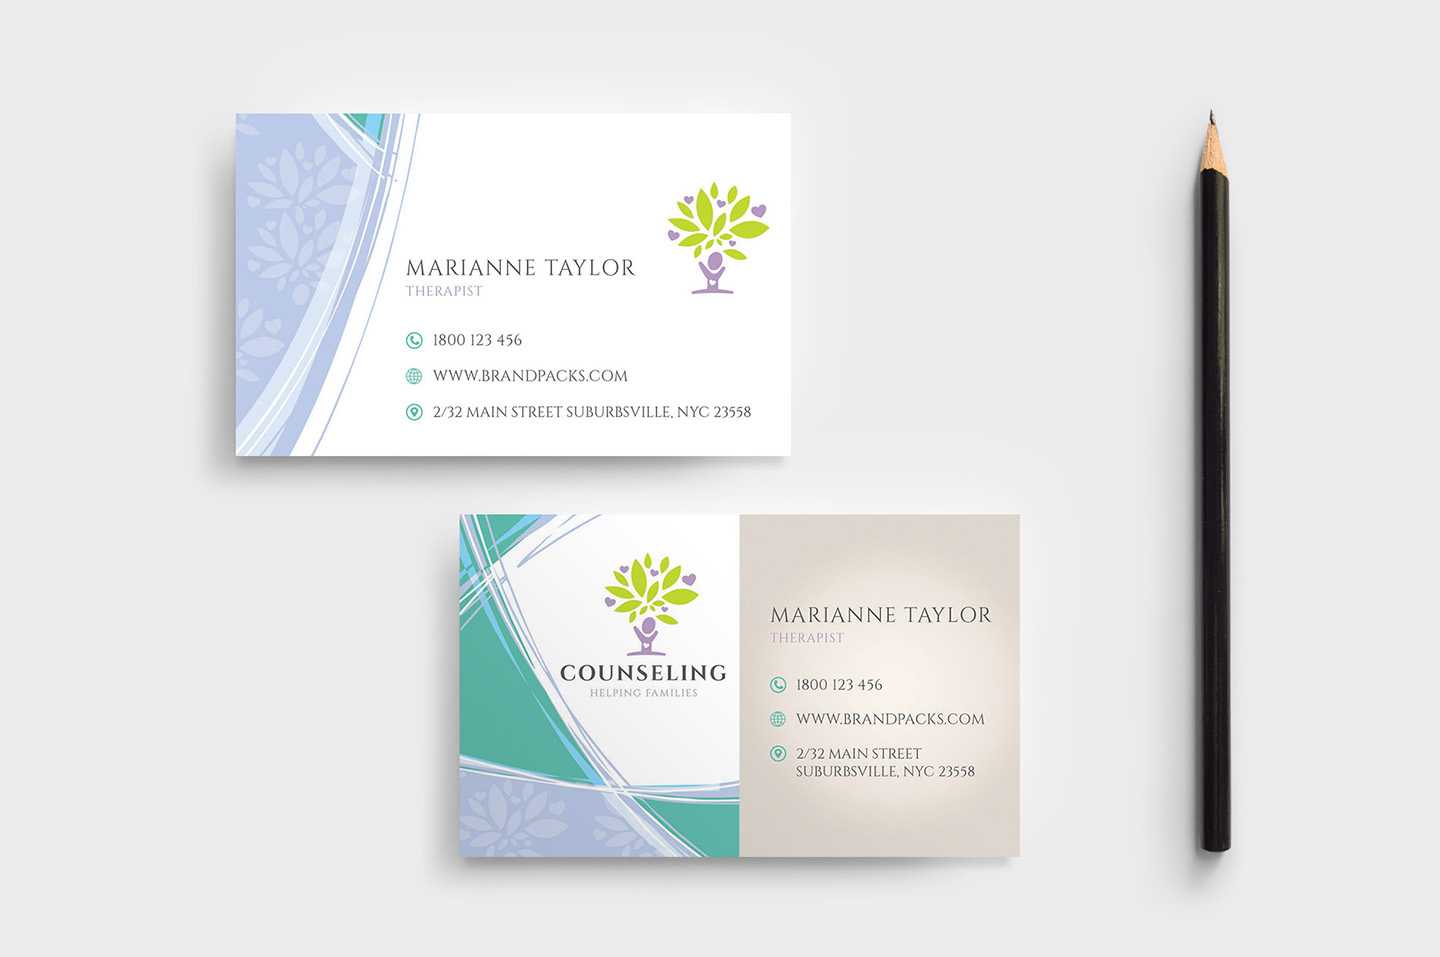 Counselling Service Business Card Template In Psd, Ai Pertaining To Business Cards For Teachers Templates Free